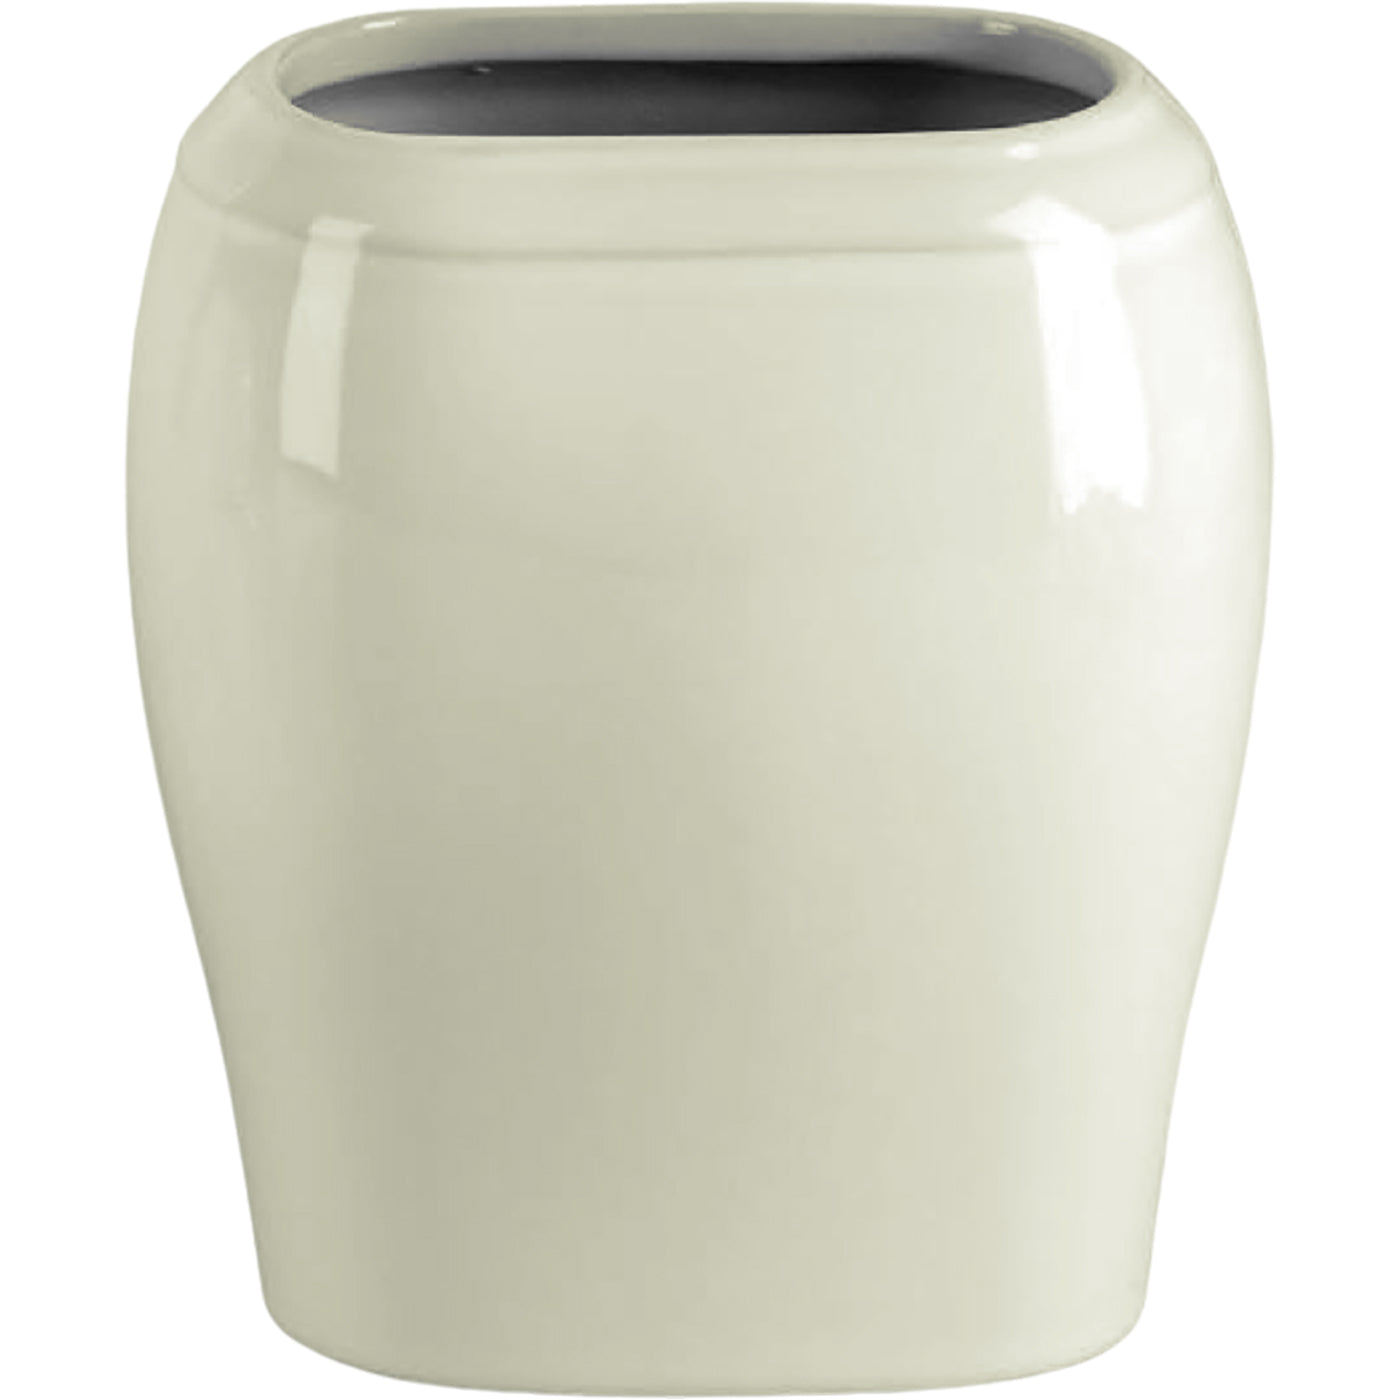 Rectangular grave vase Liscia ivory 19x17cm - 7.5x6.7in In ivory porcelain, wall attached LI142P/A